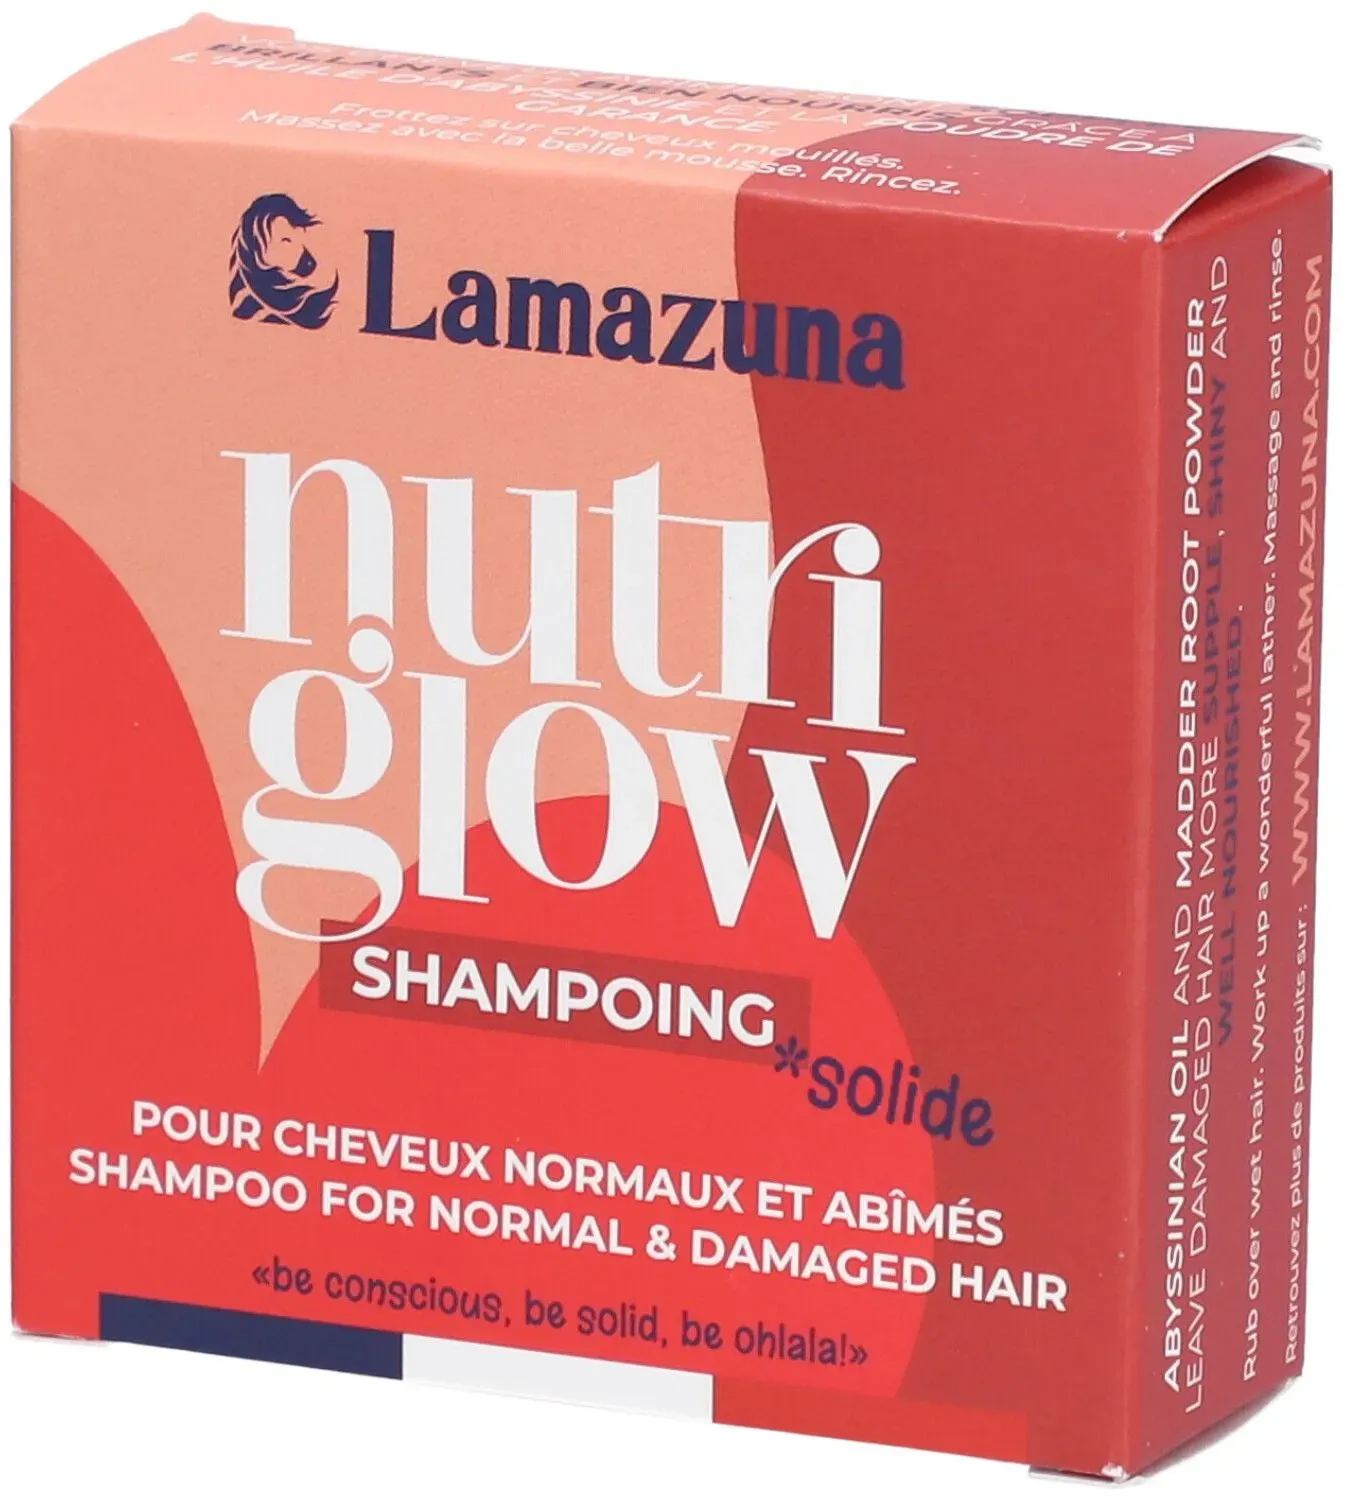 LAMAZUNA SH SOLID C/NORM HLE ABYSS 70 g shampooing